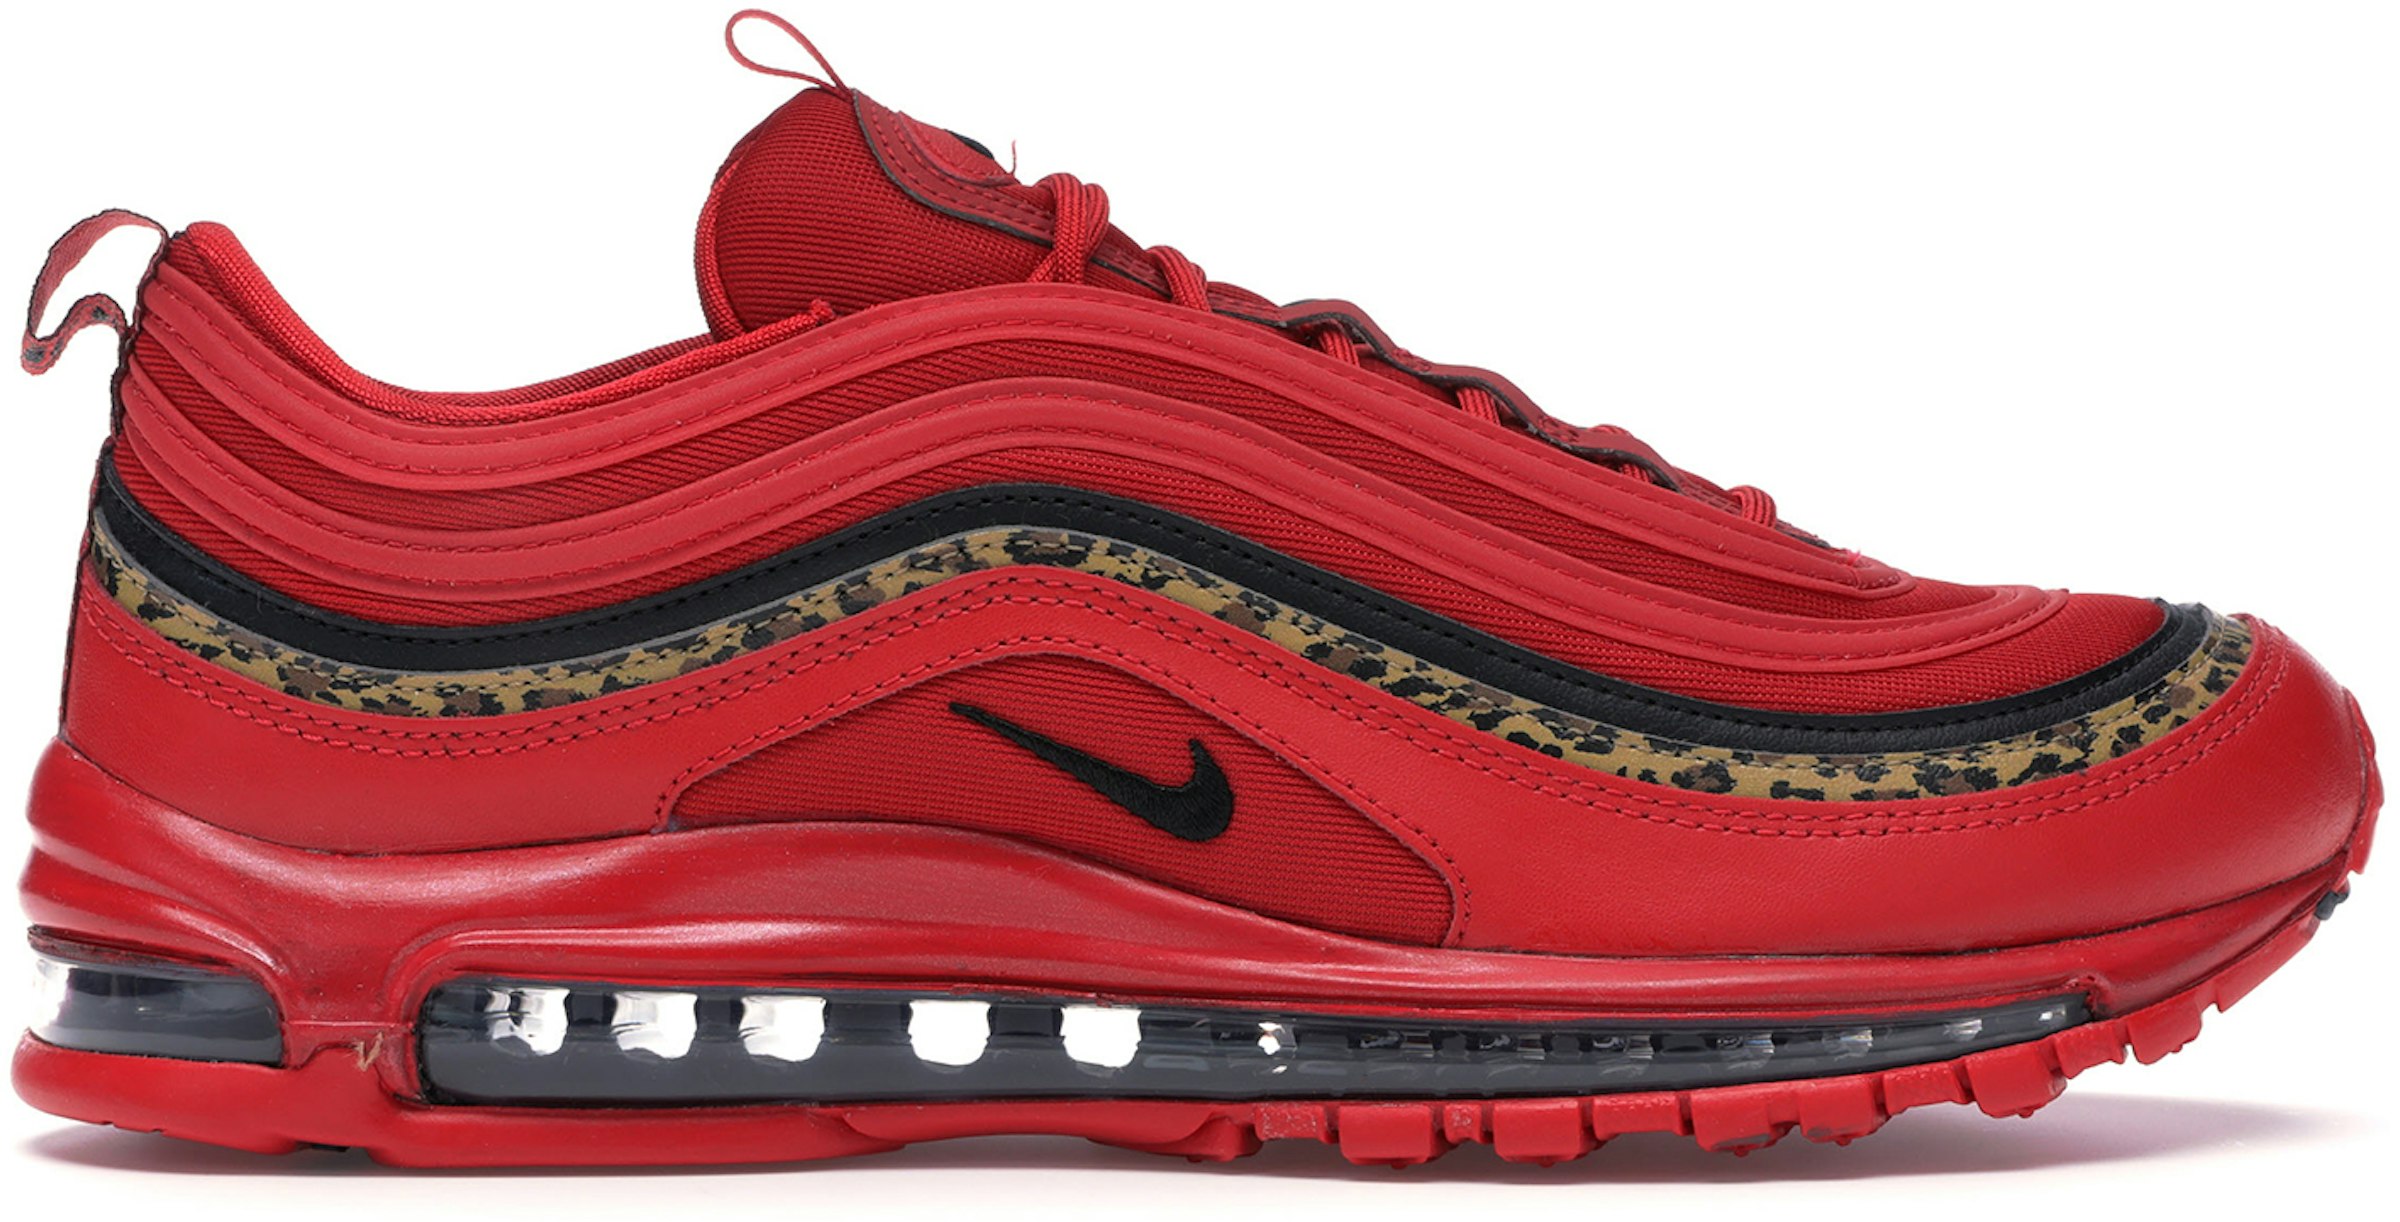 Nike Max 97 Leopard Pack Red (Women's) - BV6113-600 - US